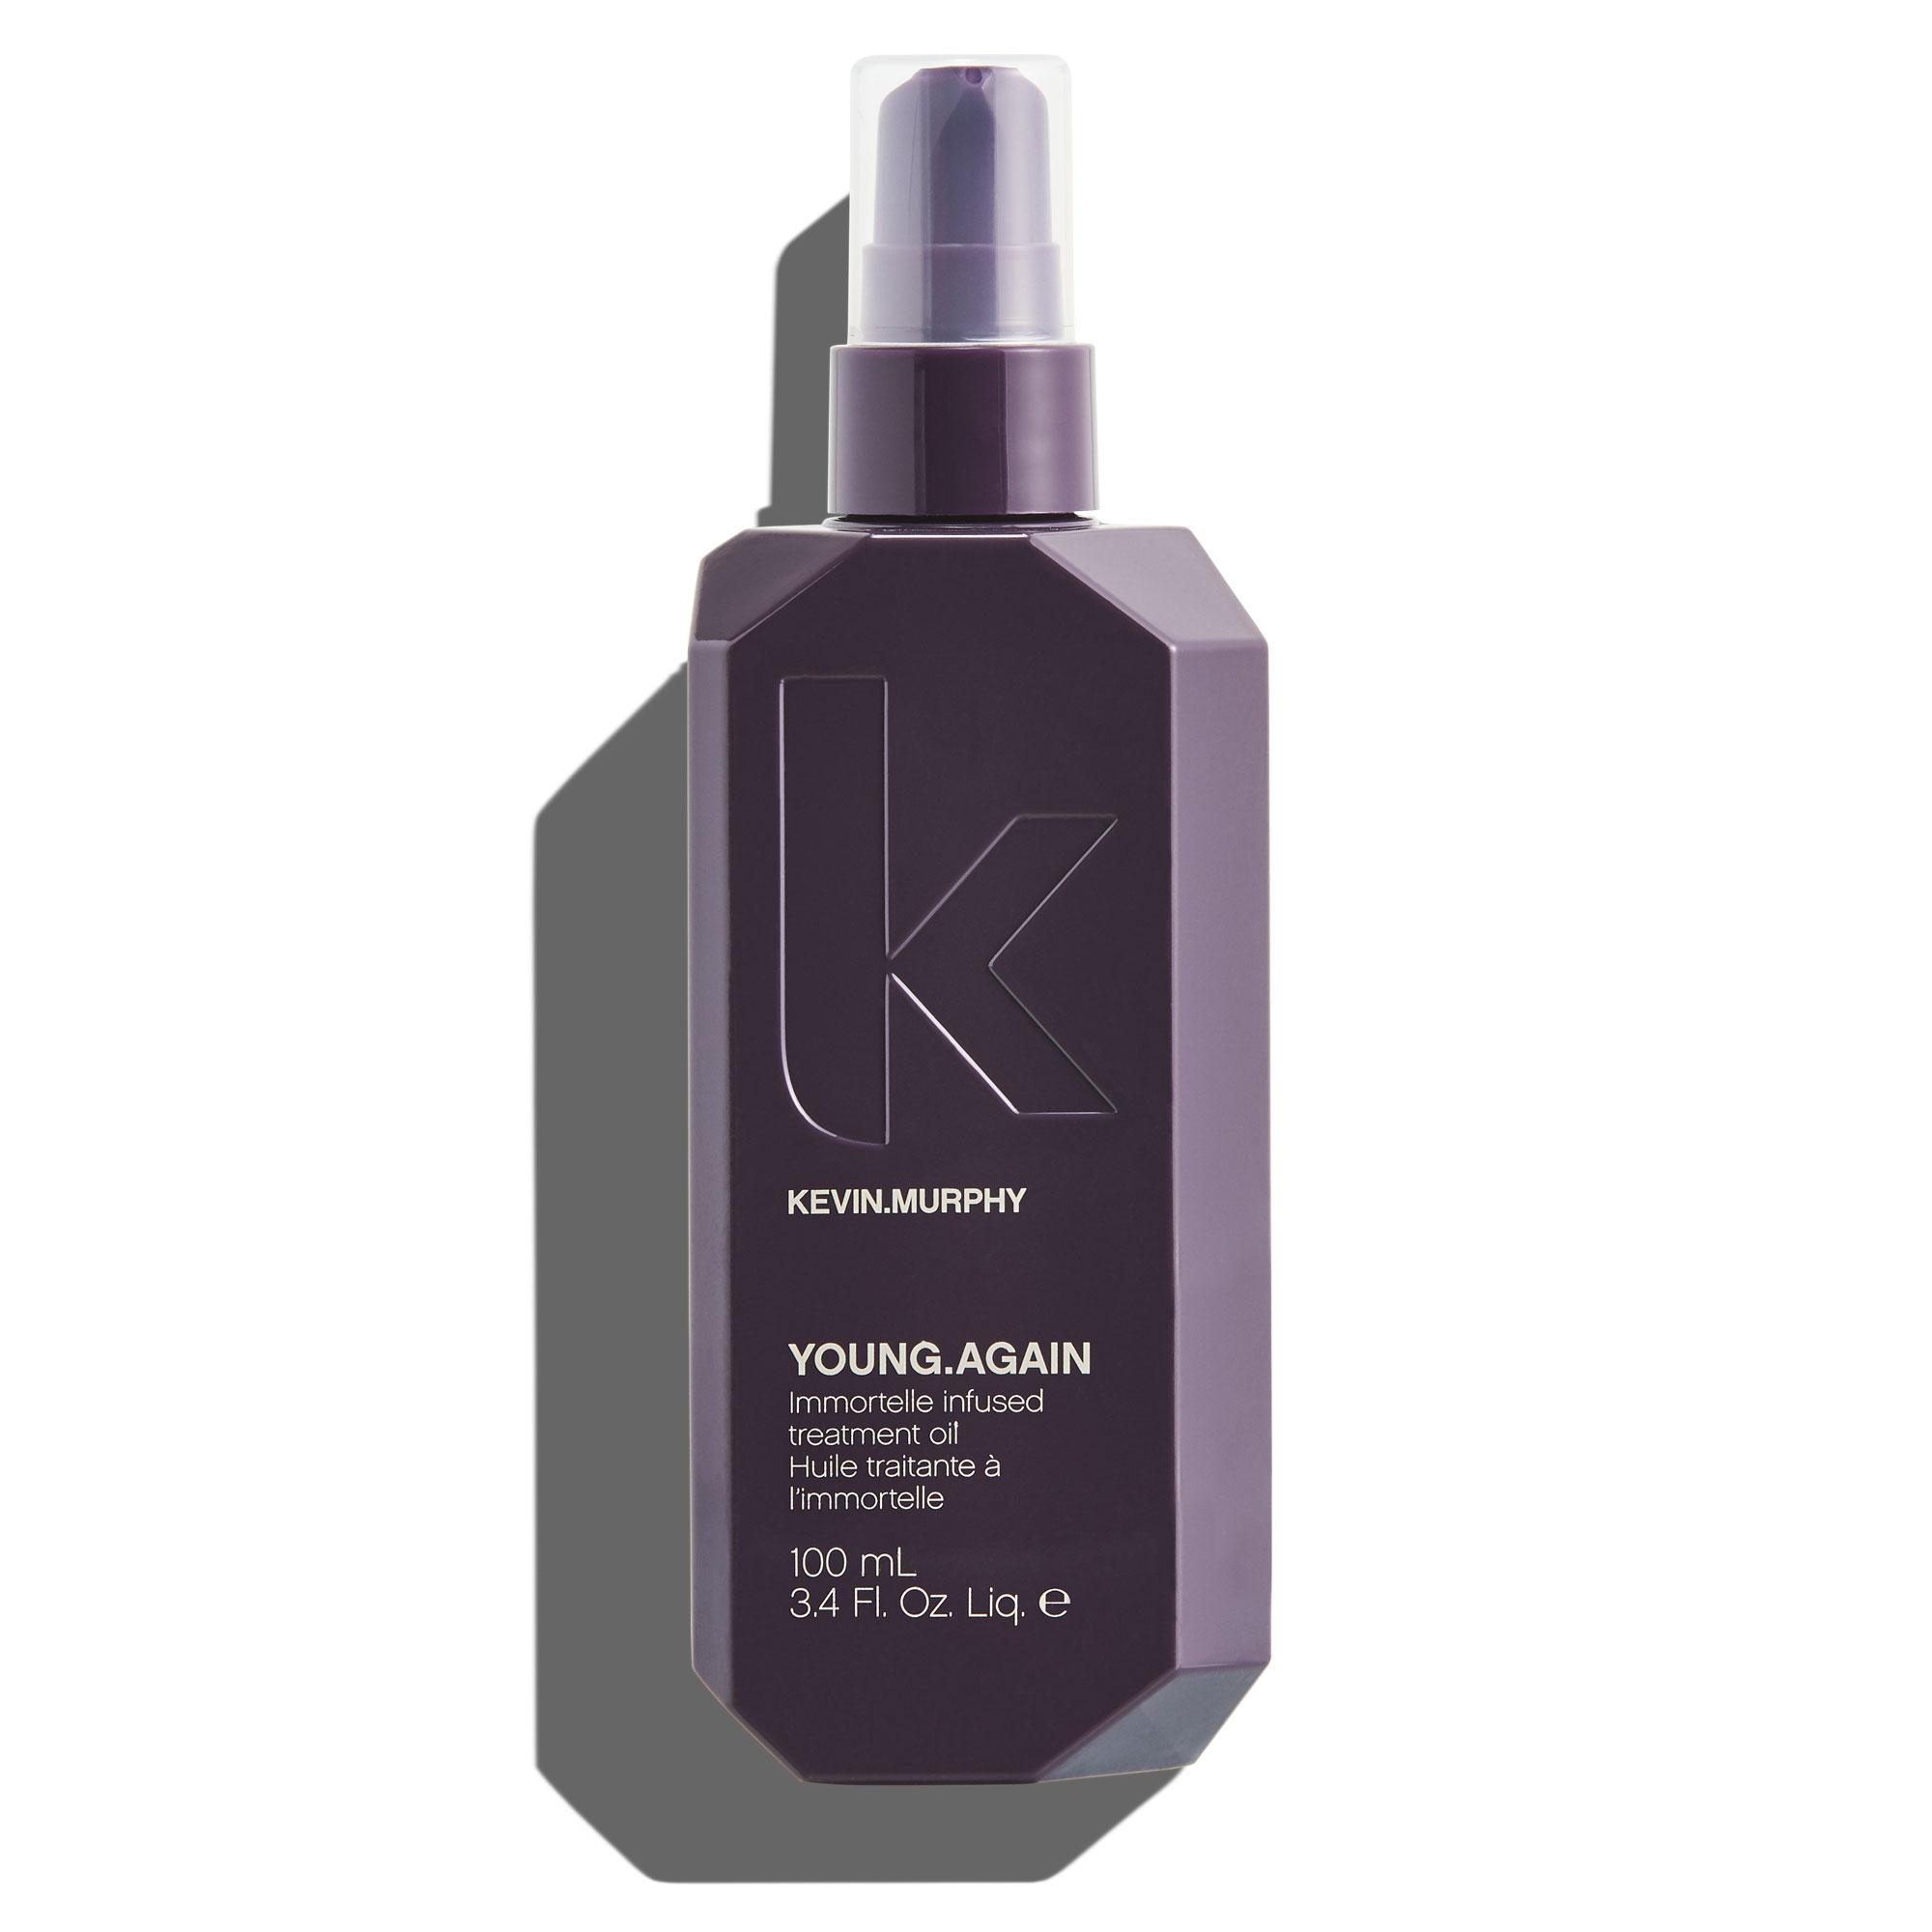 KEVIN.MURPHY YOUNG.AGAIN 3.4oz